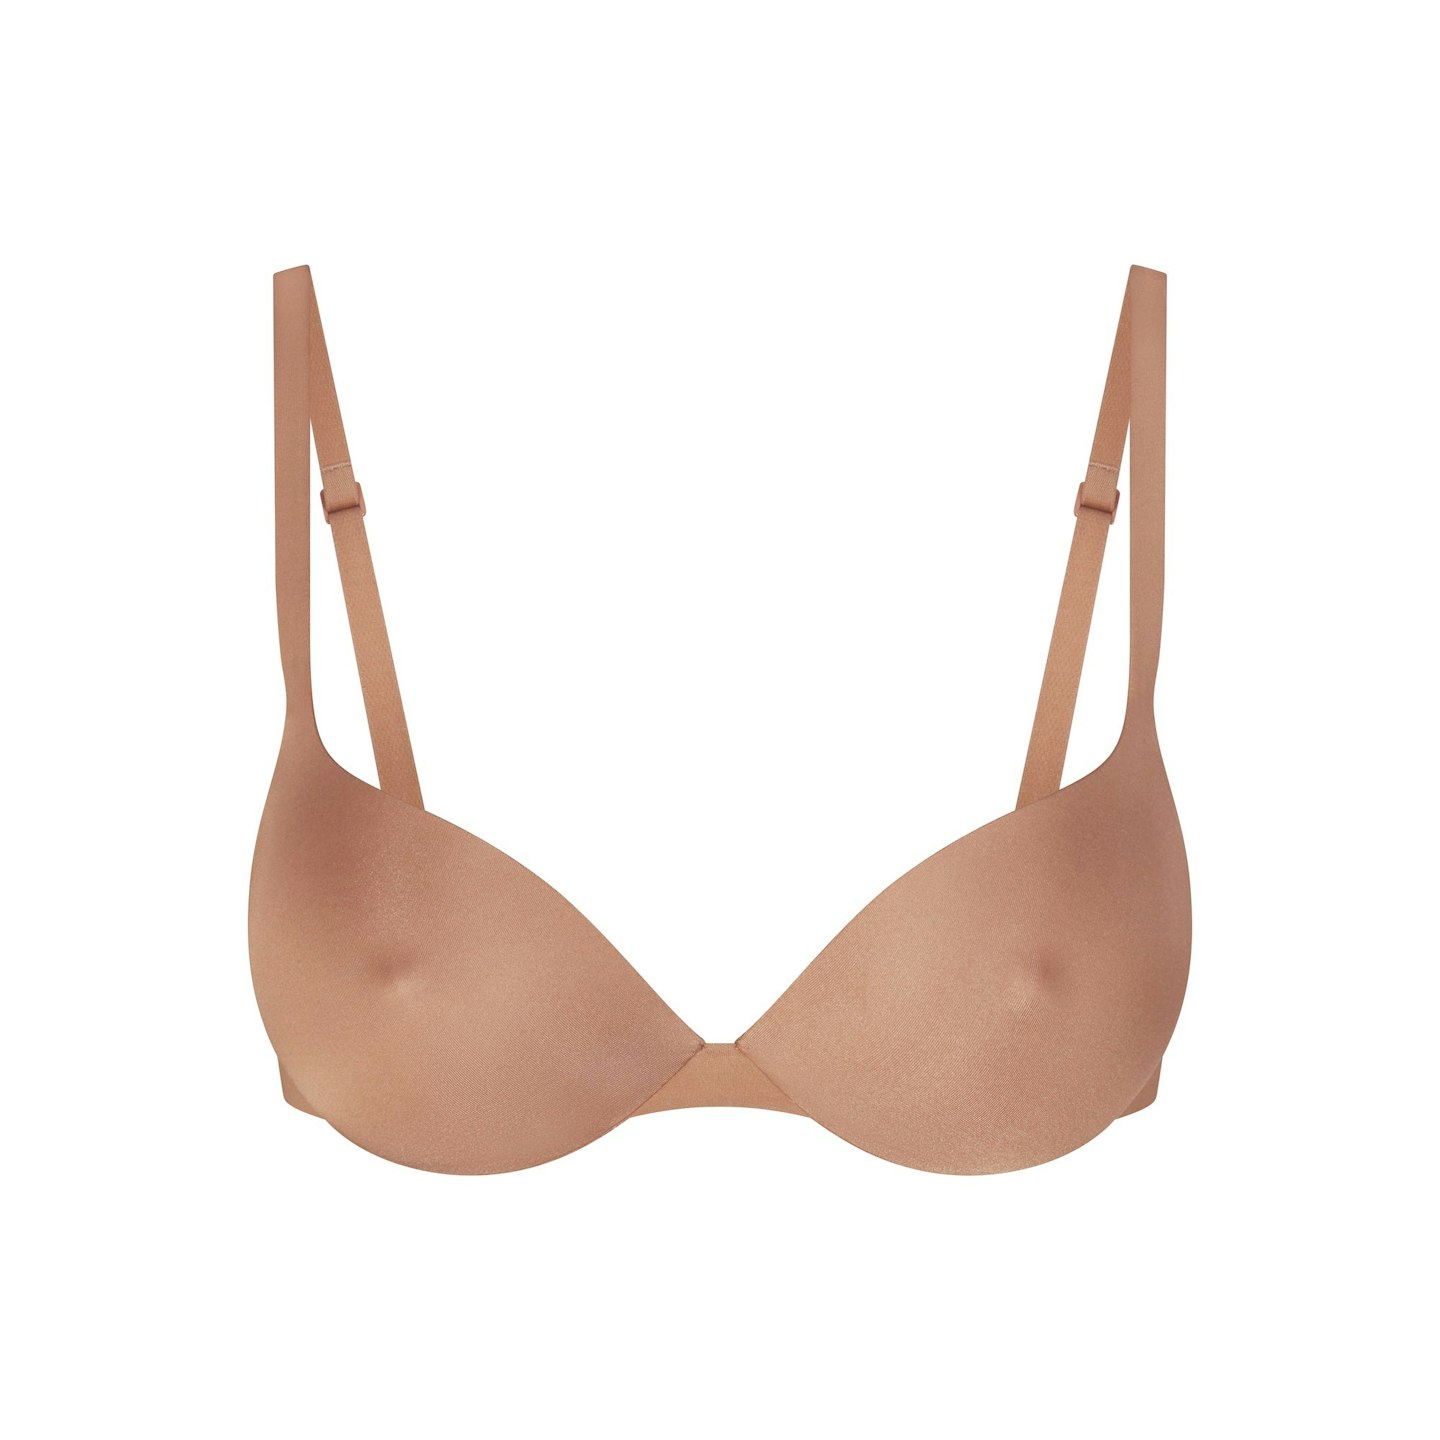 Dare to bare your best boobs in the Ultimate Nipple Bra, featuring faux  raised nipples everything will think are yours. @suedebrooks wea